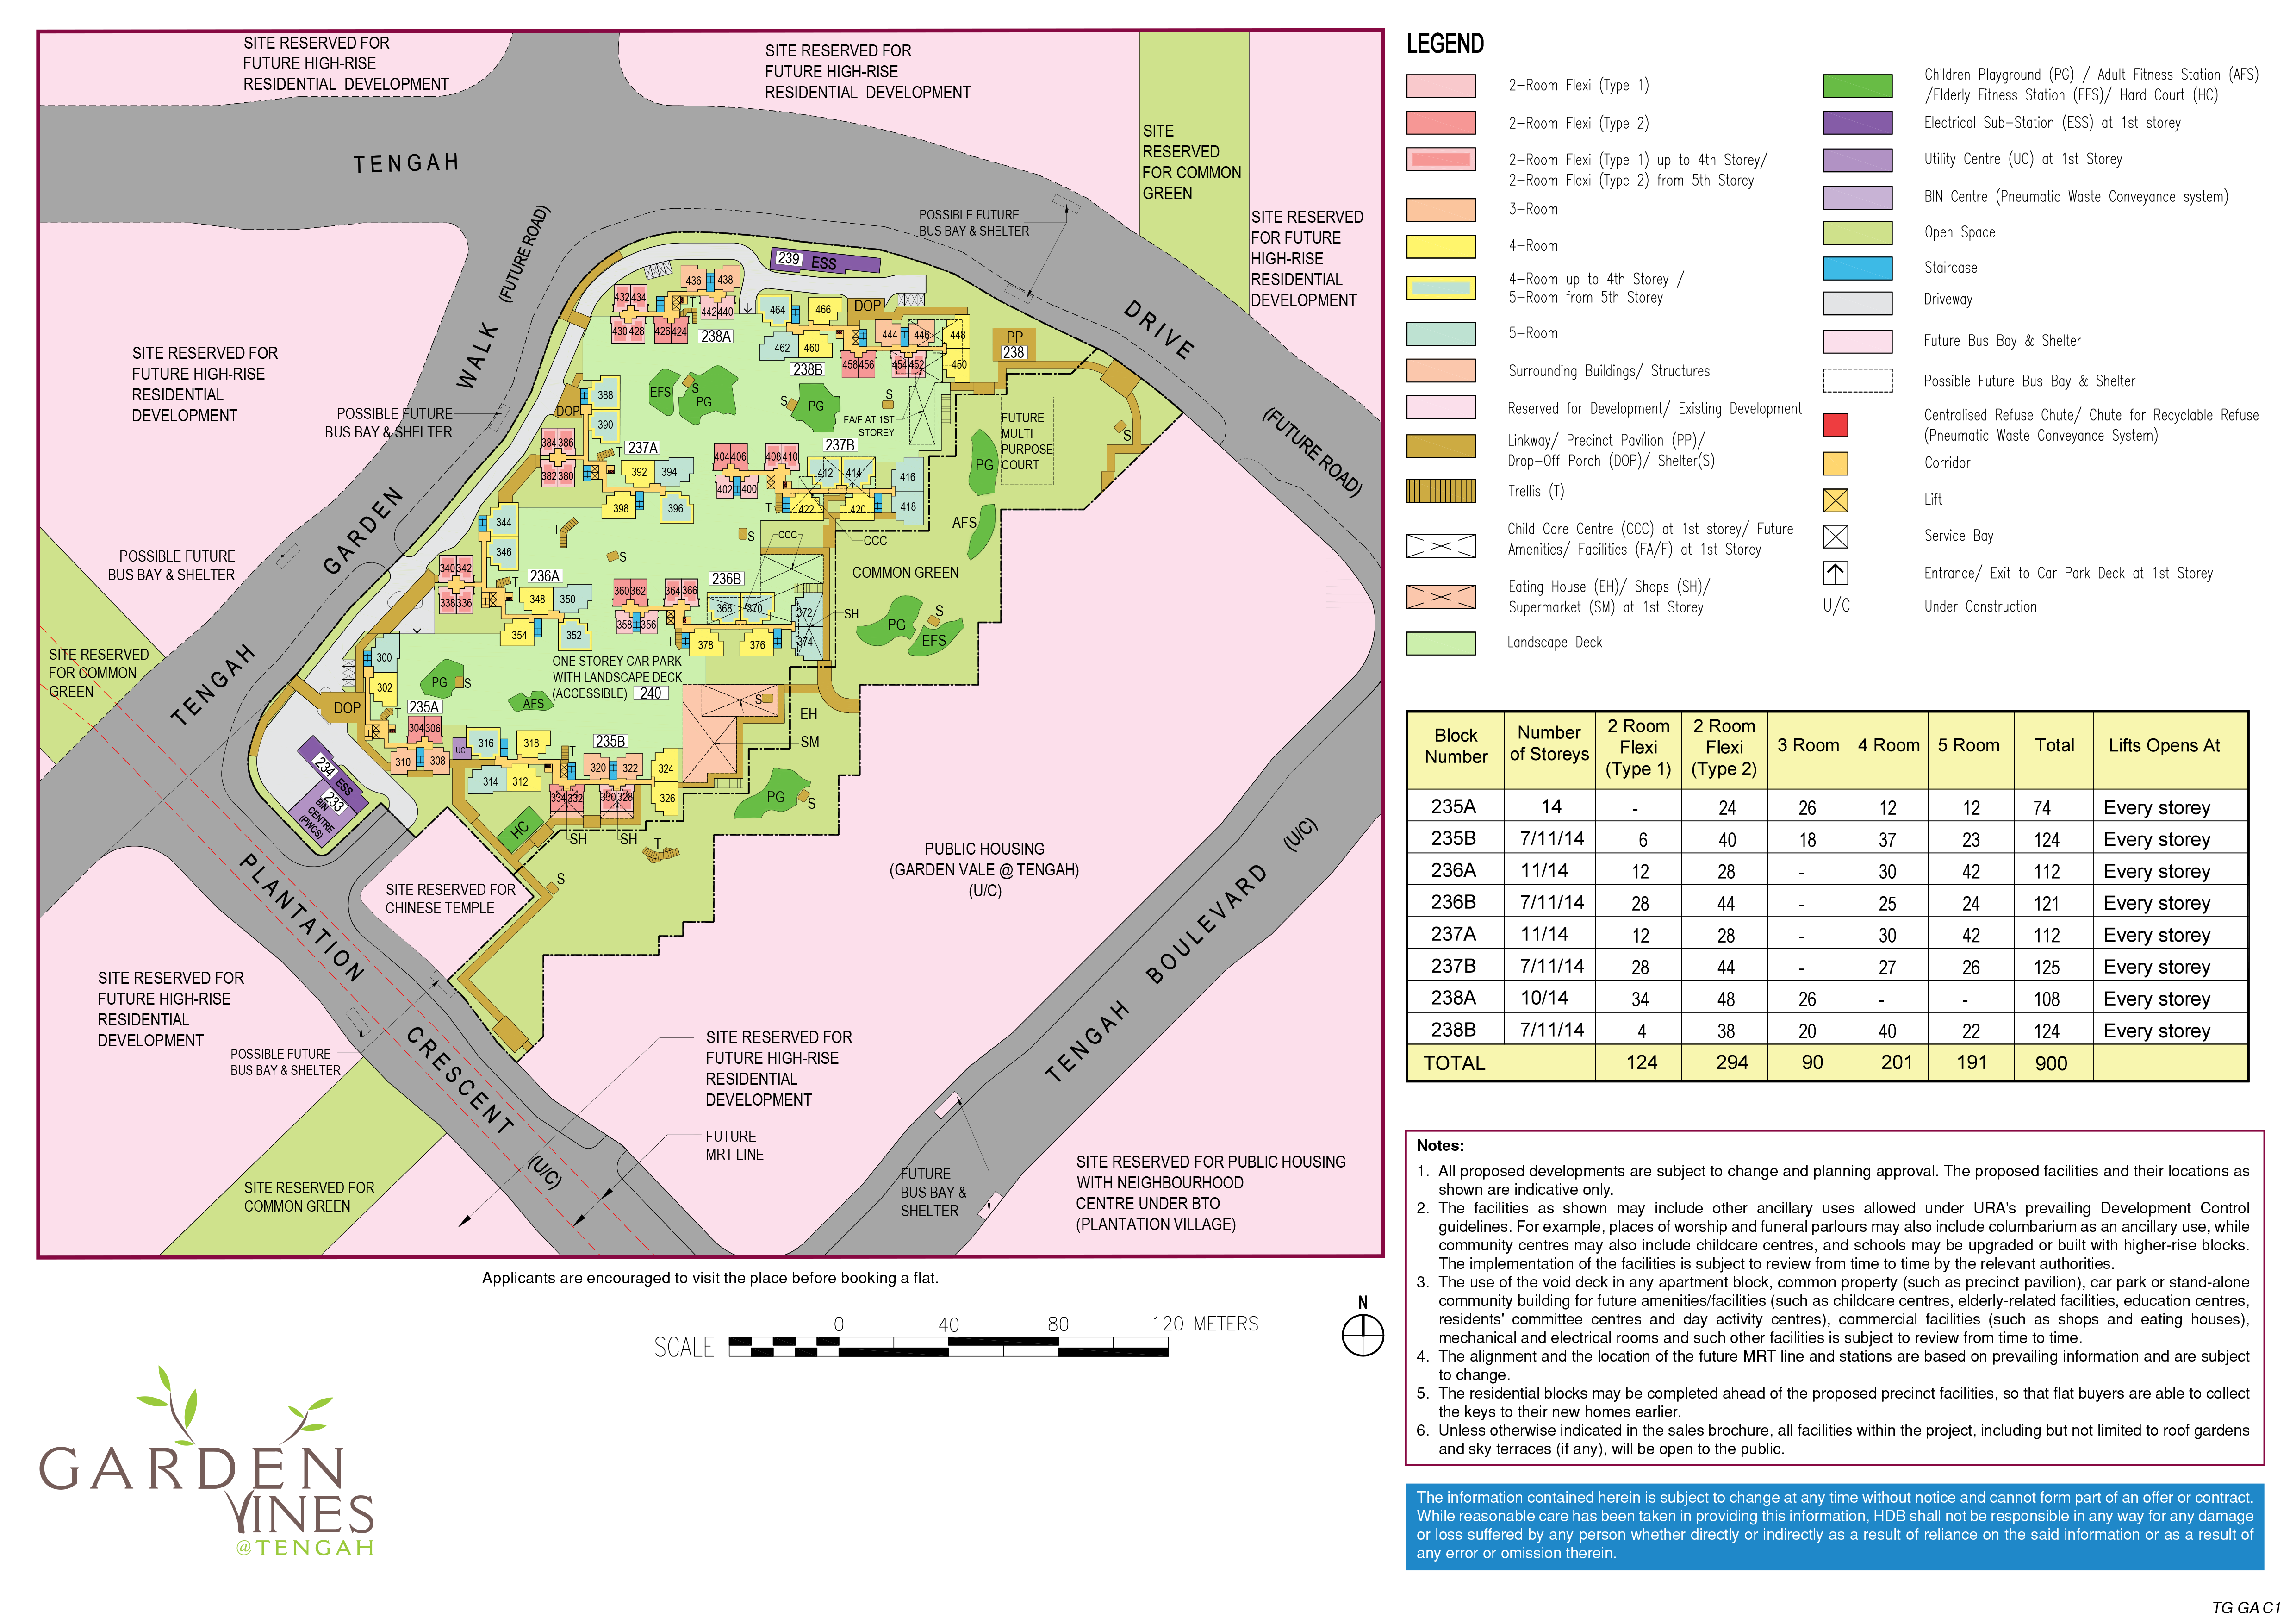 HDB Garden Vines @ Tengah BTO launched in November 2019 + a Case Study